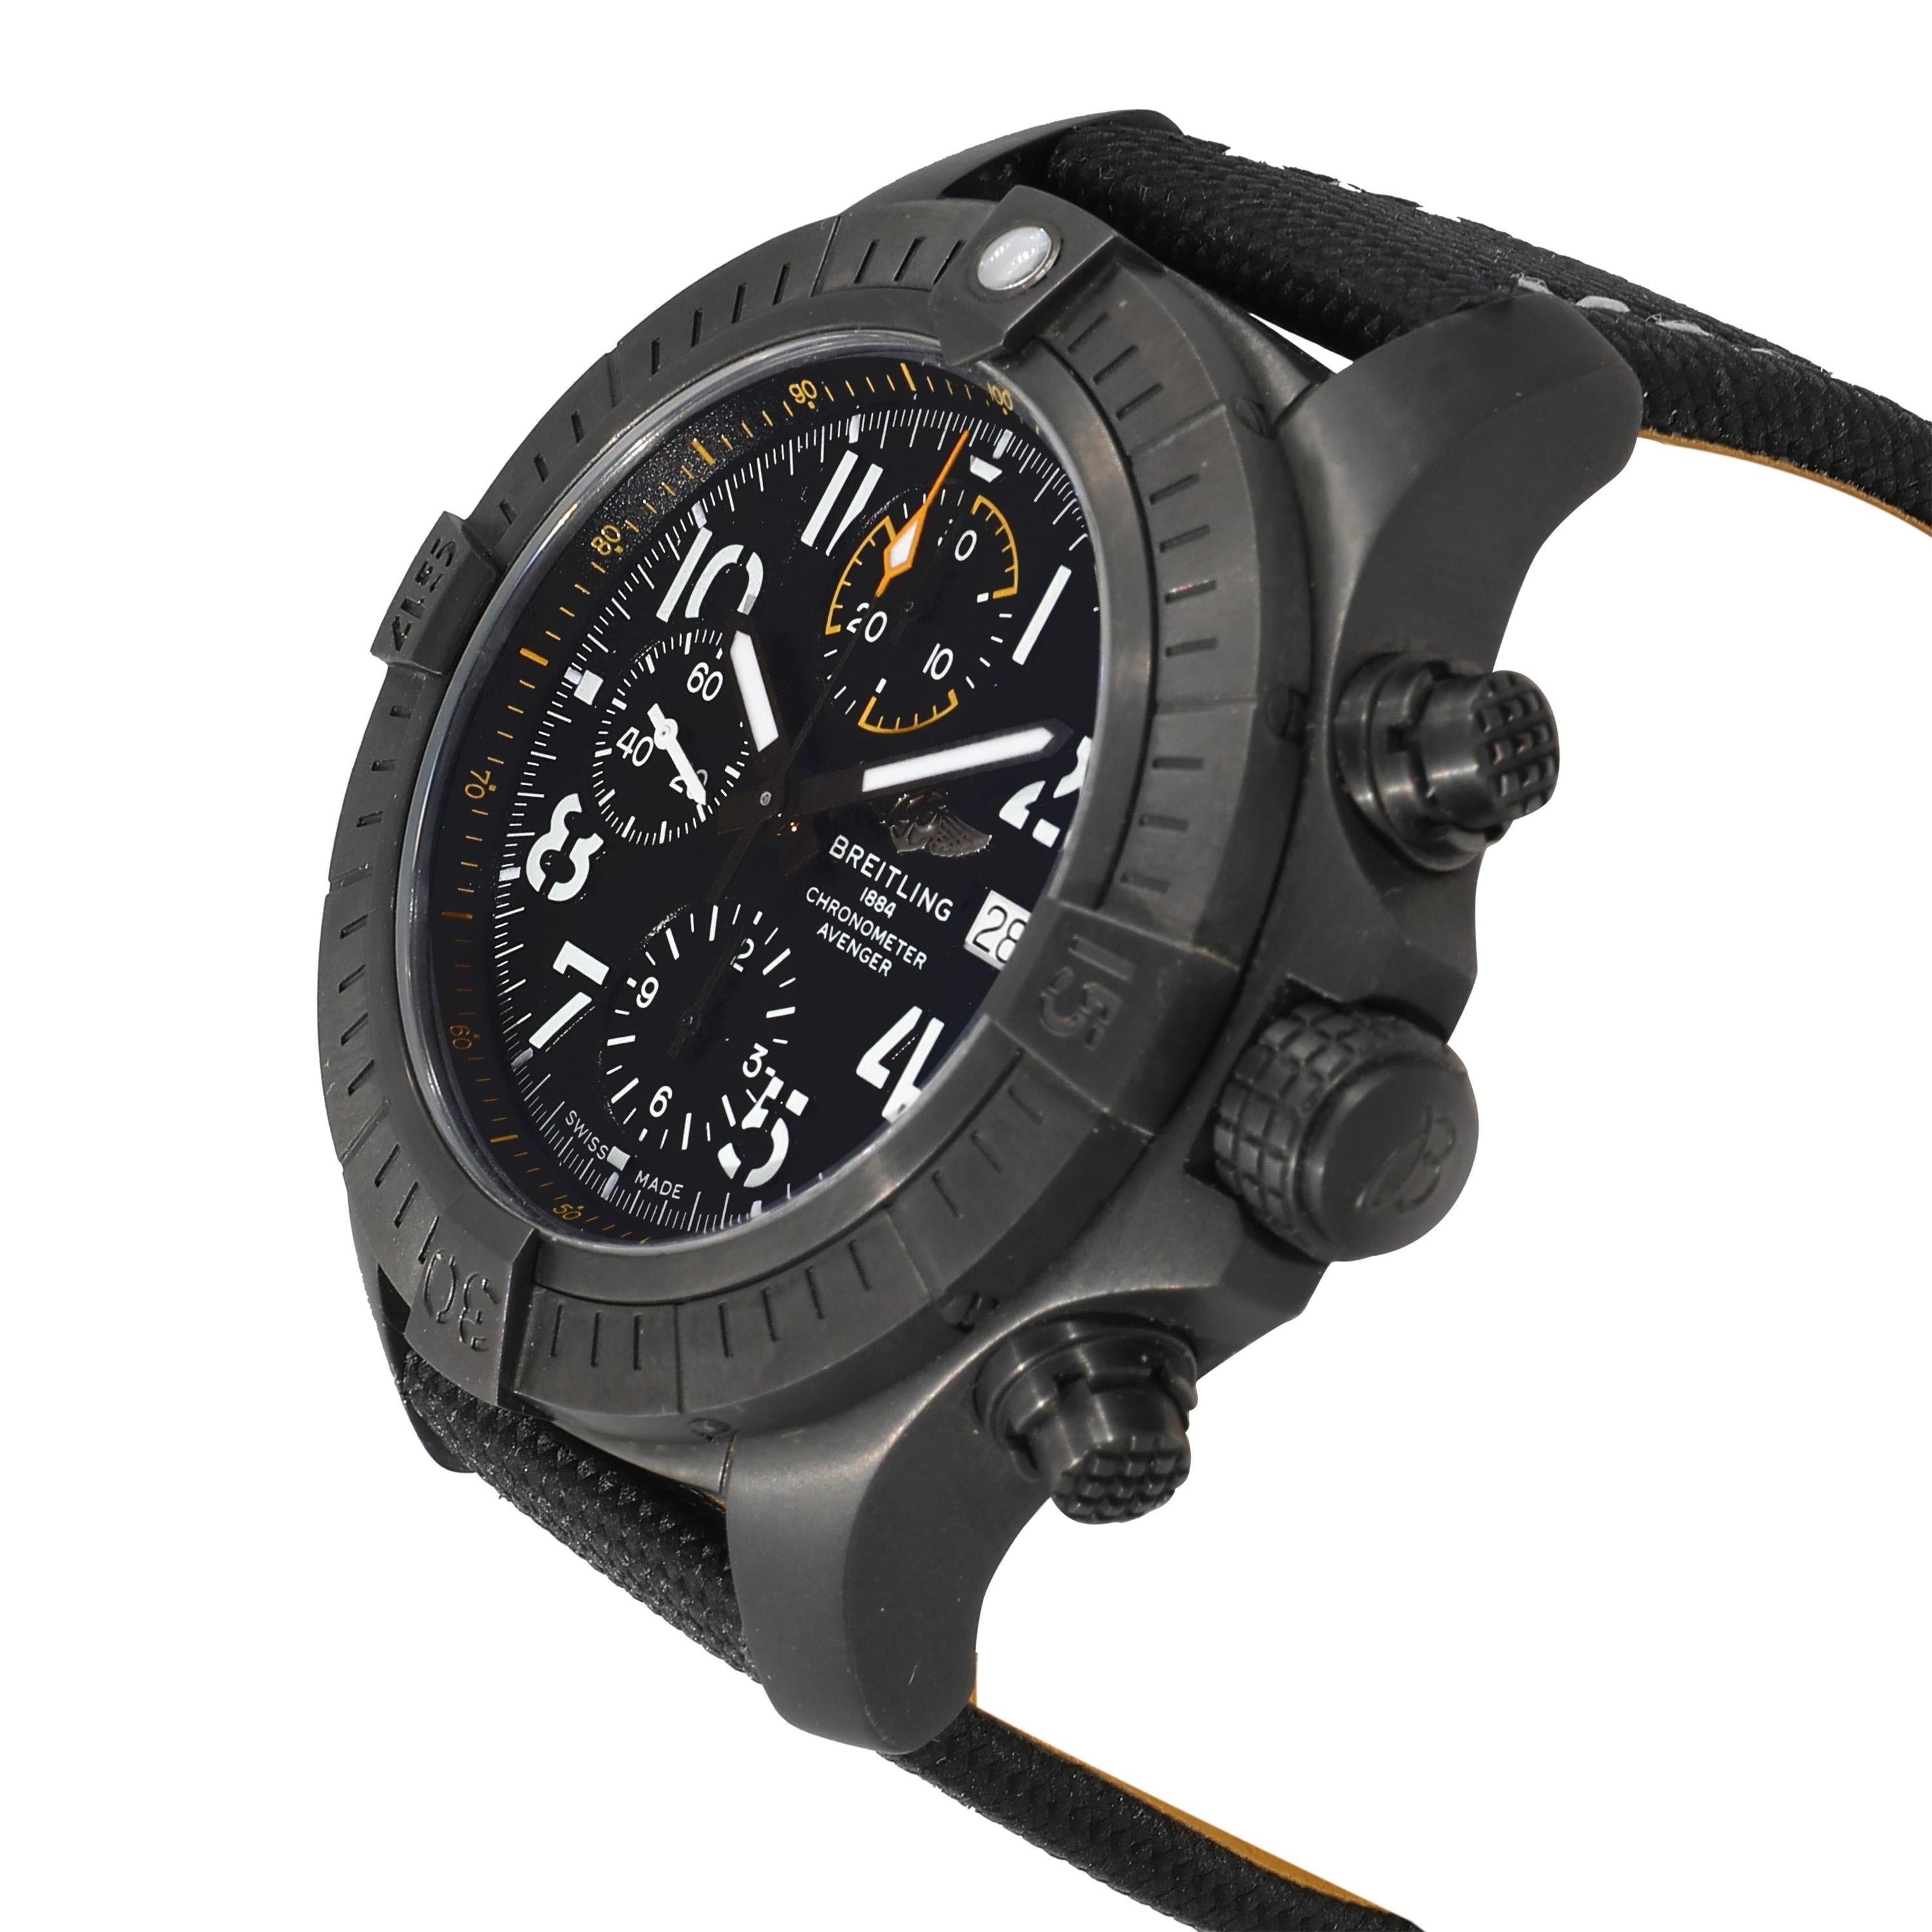 Breitling Avenger Night Mission V13317101B1X2 Men's Watch in  Black Steel

SKU: 131990

PRIMARY DETAILS
Brand: Breitling
Model: Avenger Night Mission
Country of Origin: Switzerland
Movement Type: Mechanical: Automatic/Kinetic
Year Manufactured: